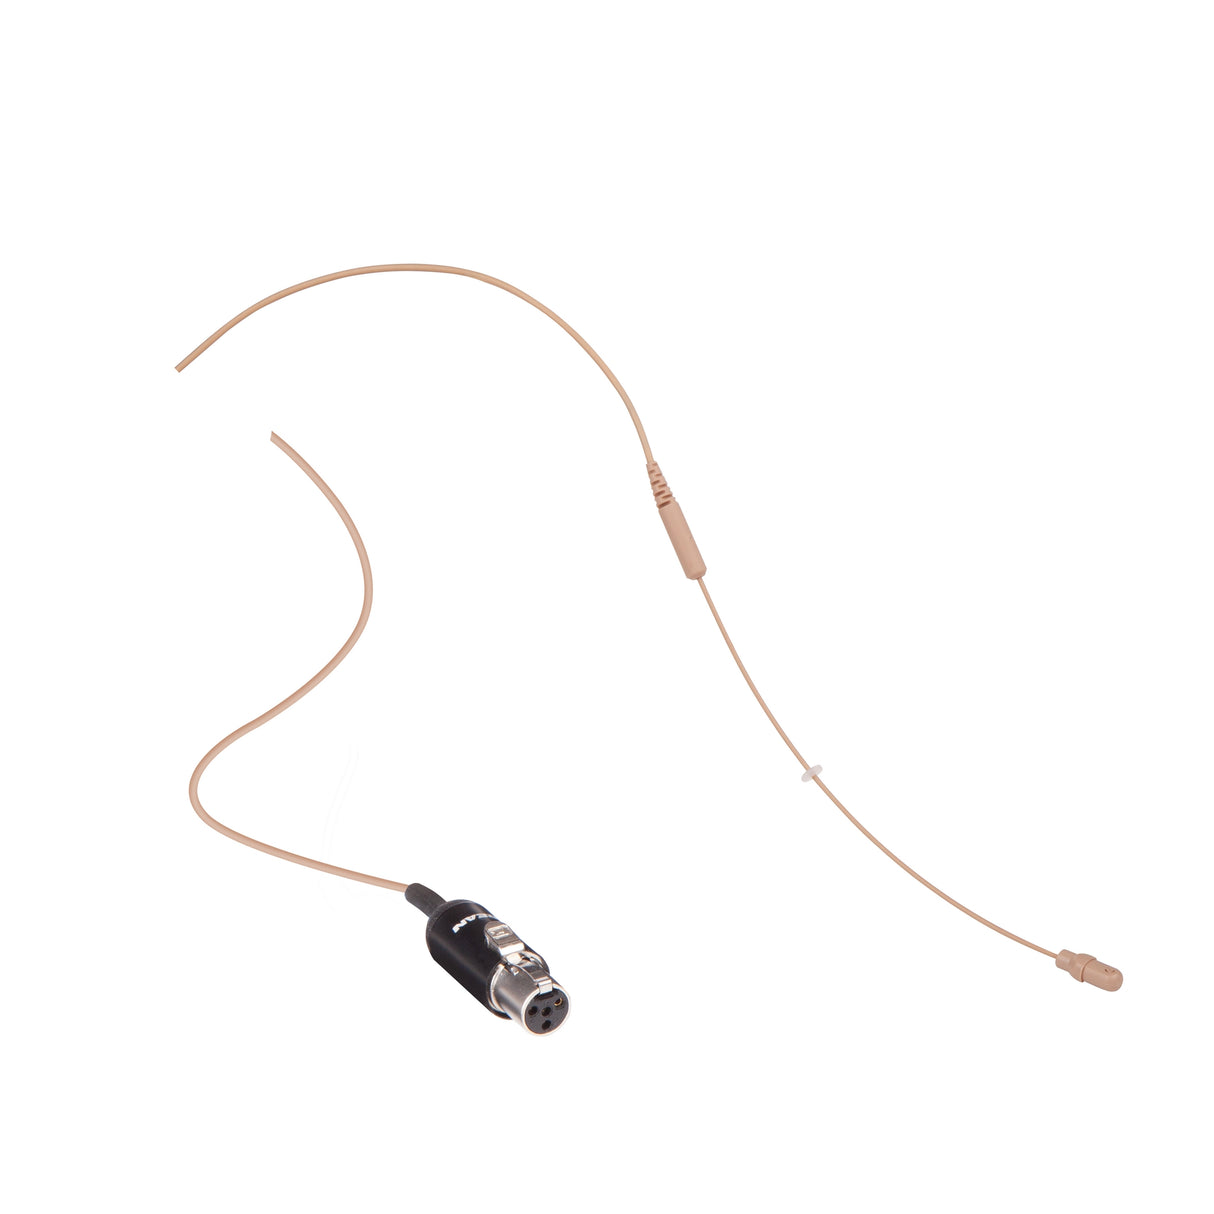 Shure RPMDH5T/O-MTQG Microphone Boom and Cable Assembly for DH5, Tan, MTQG